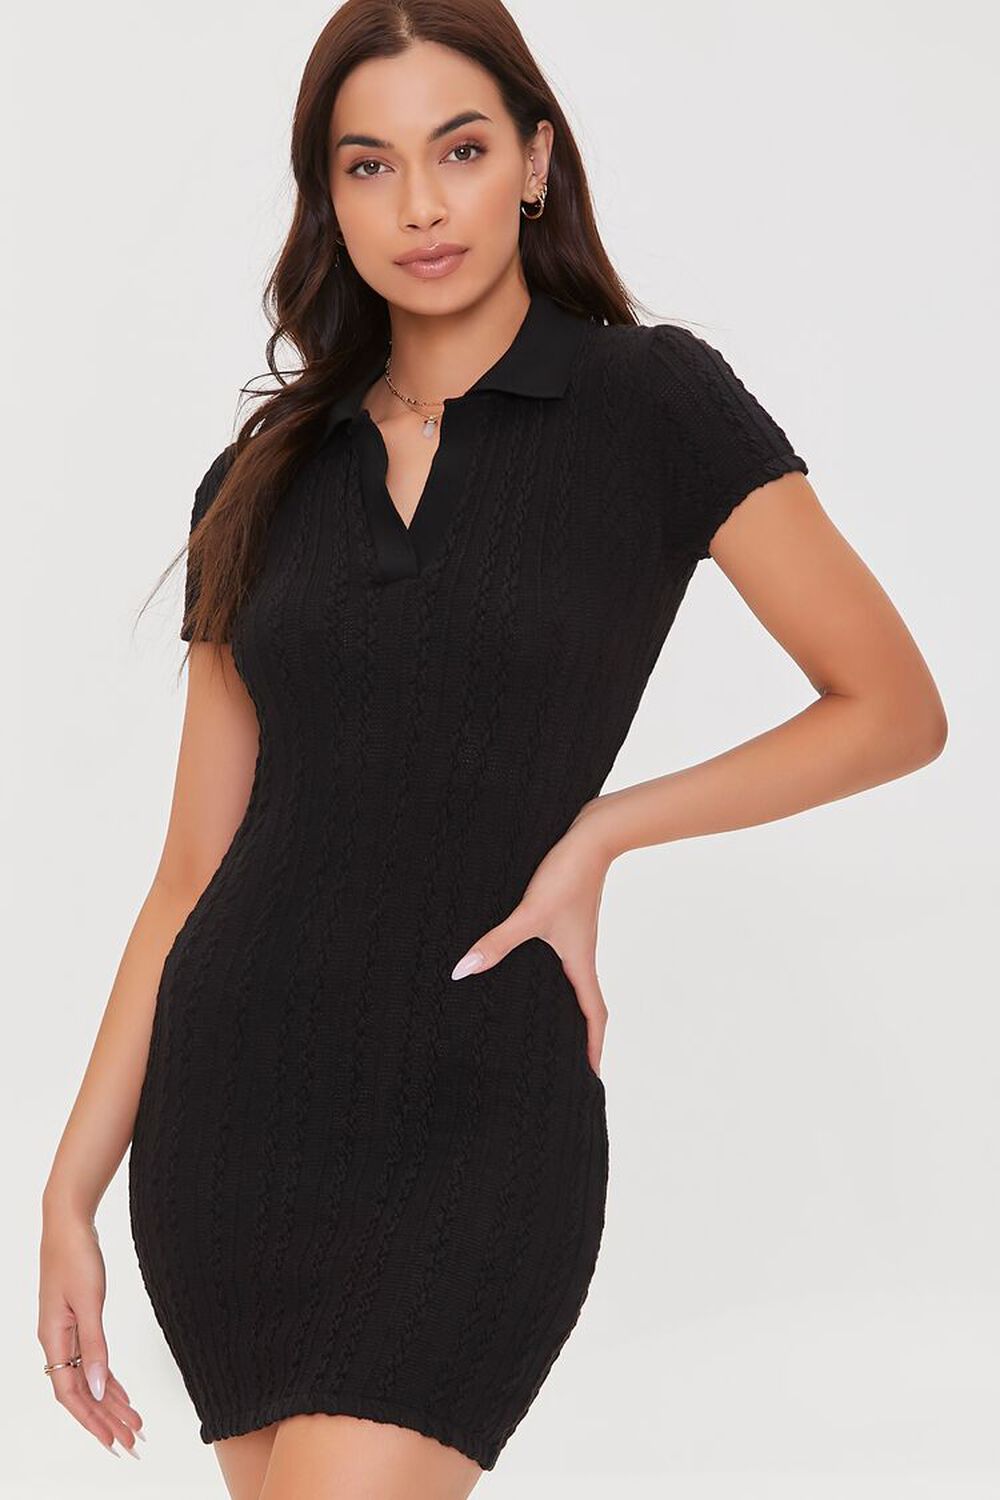 BLACK Cable Knit Bodycon Dress, image 1